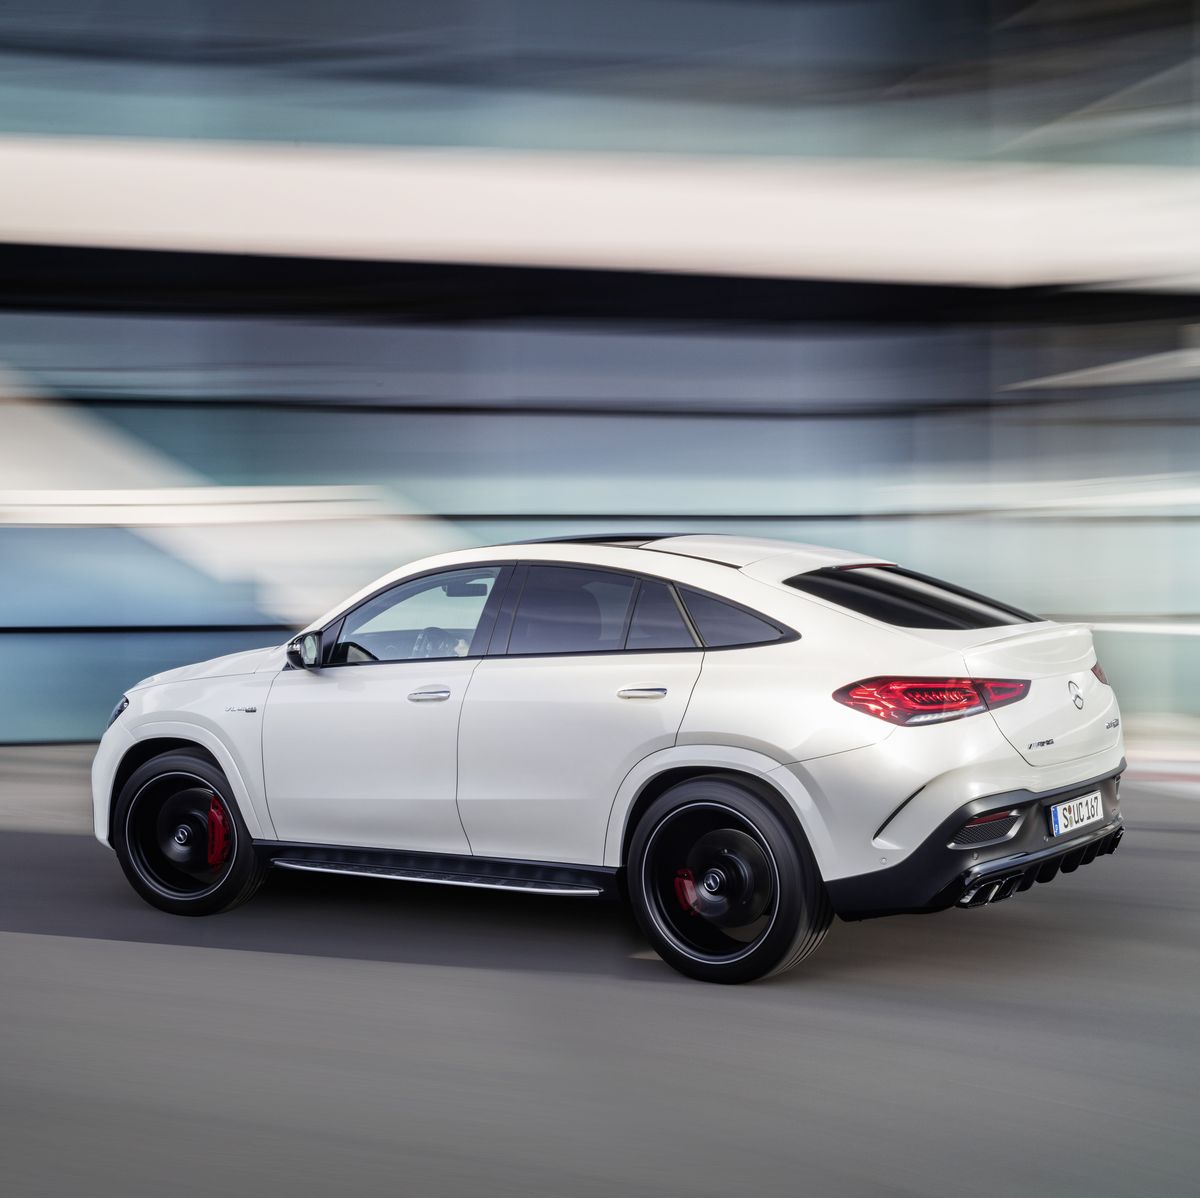 603-HP 2021 Mercedes-AMG GLE63 S Coupe Starts at $117,050